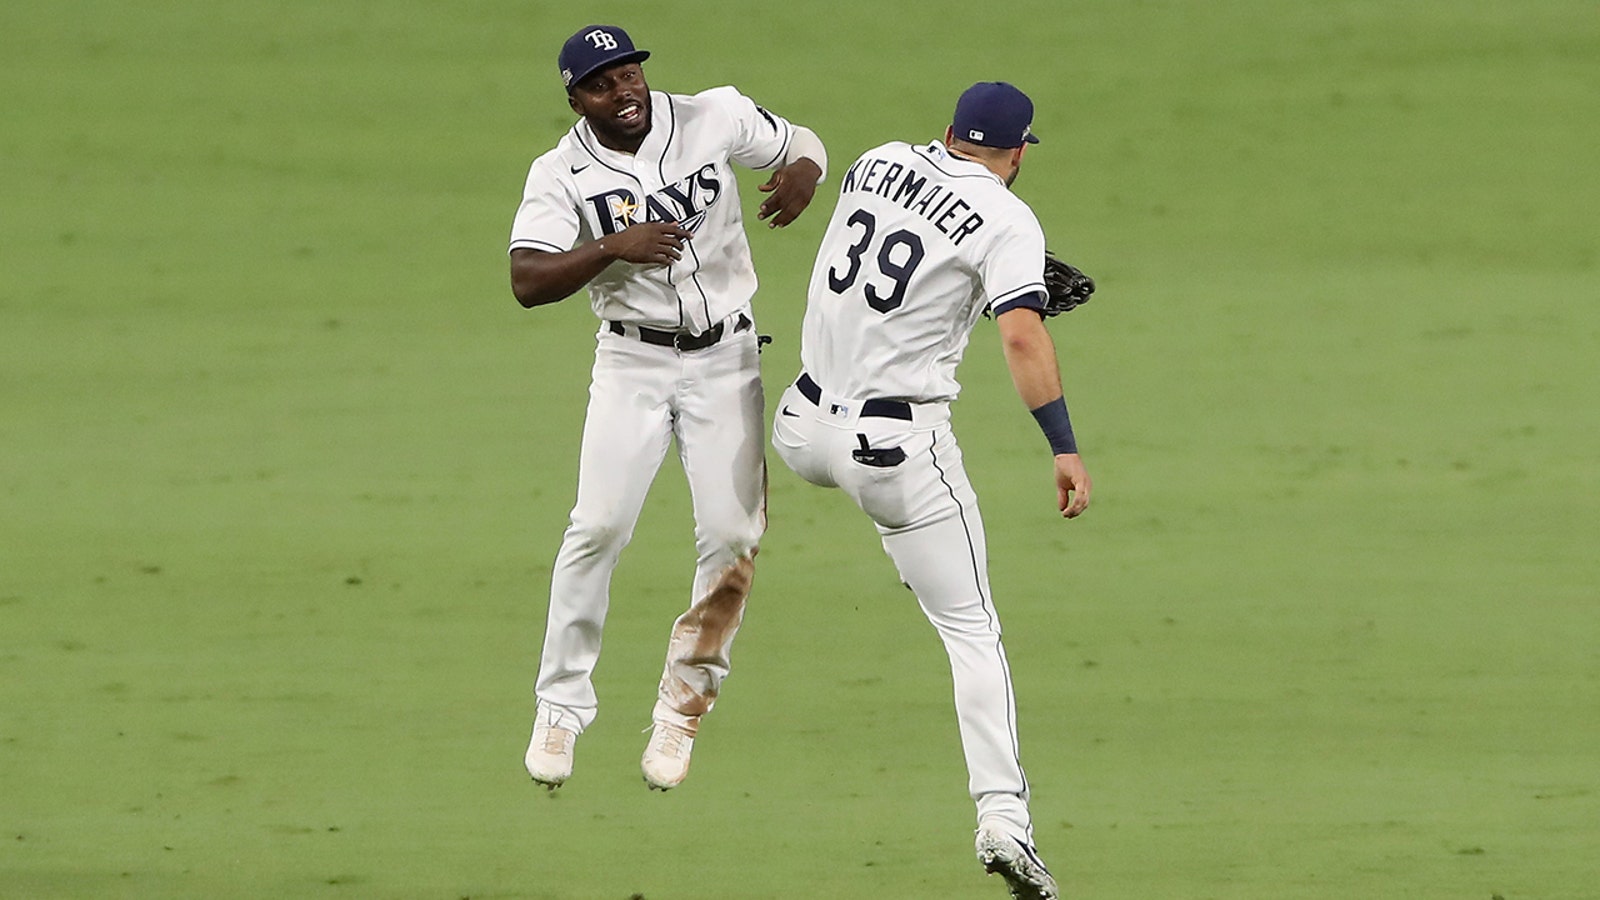 5 Reasons Why The Rays Will Win the World Series